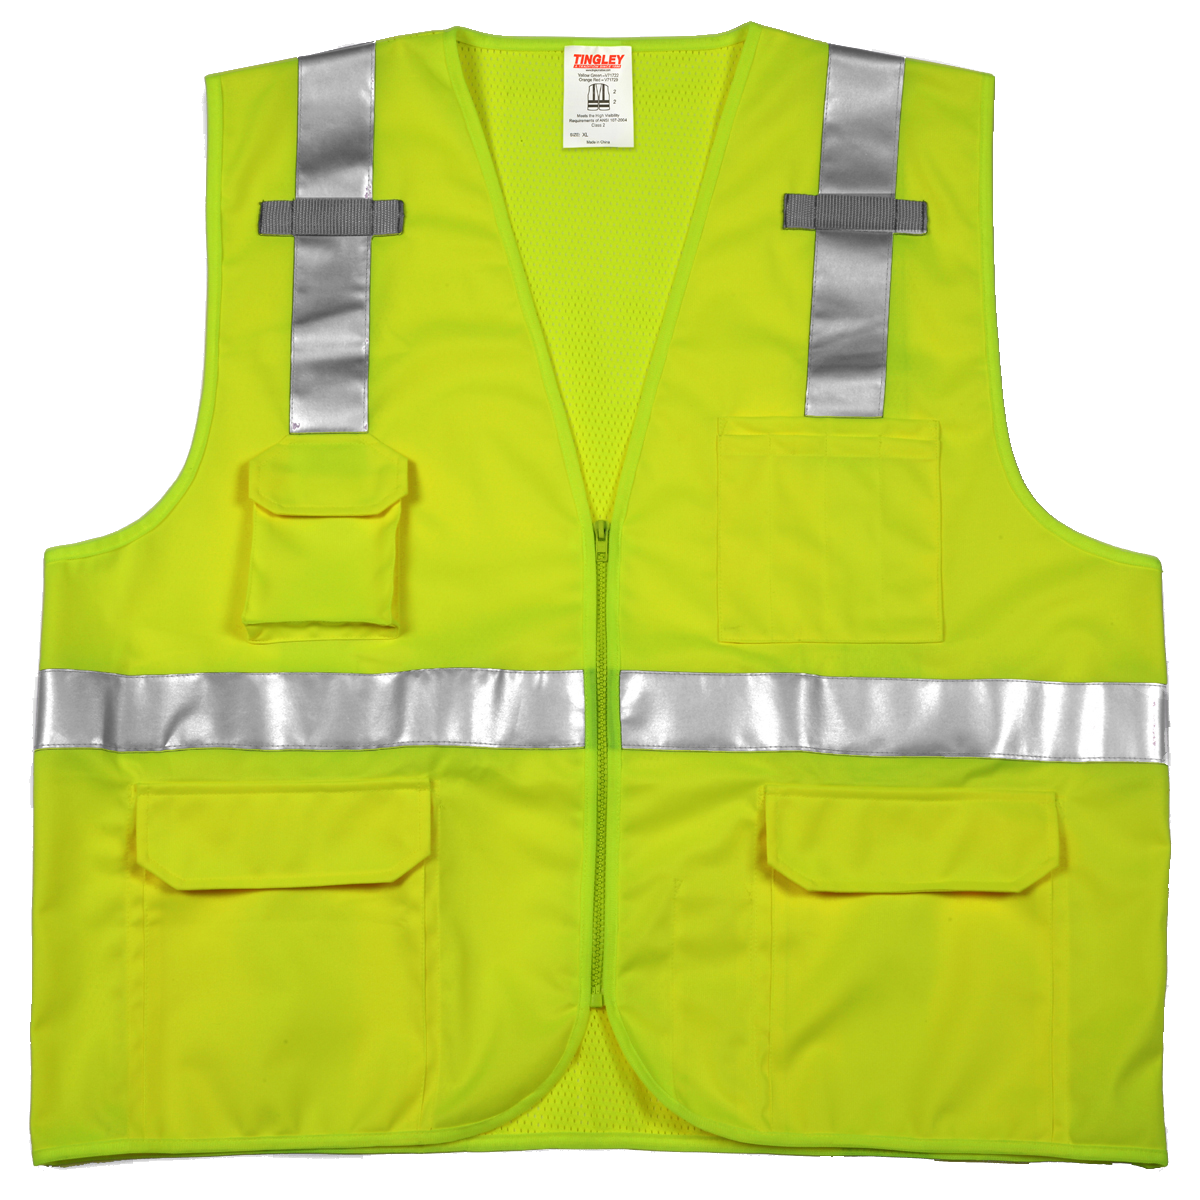 Type R Class 2 Surveyor Style Vest - Fluorescent Yellow-Green - Polyester Solid Front, Mesh Back - Zipper Closure - 2 Mic Tabs - 5 Exterior Pockets - 3 Interior Pockets - Silver Reflective Tape-eSafety Supplies, Inc